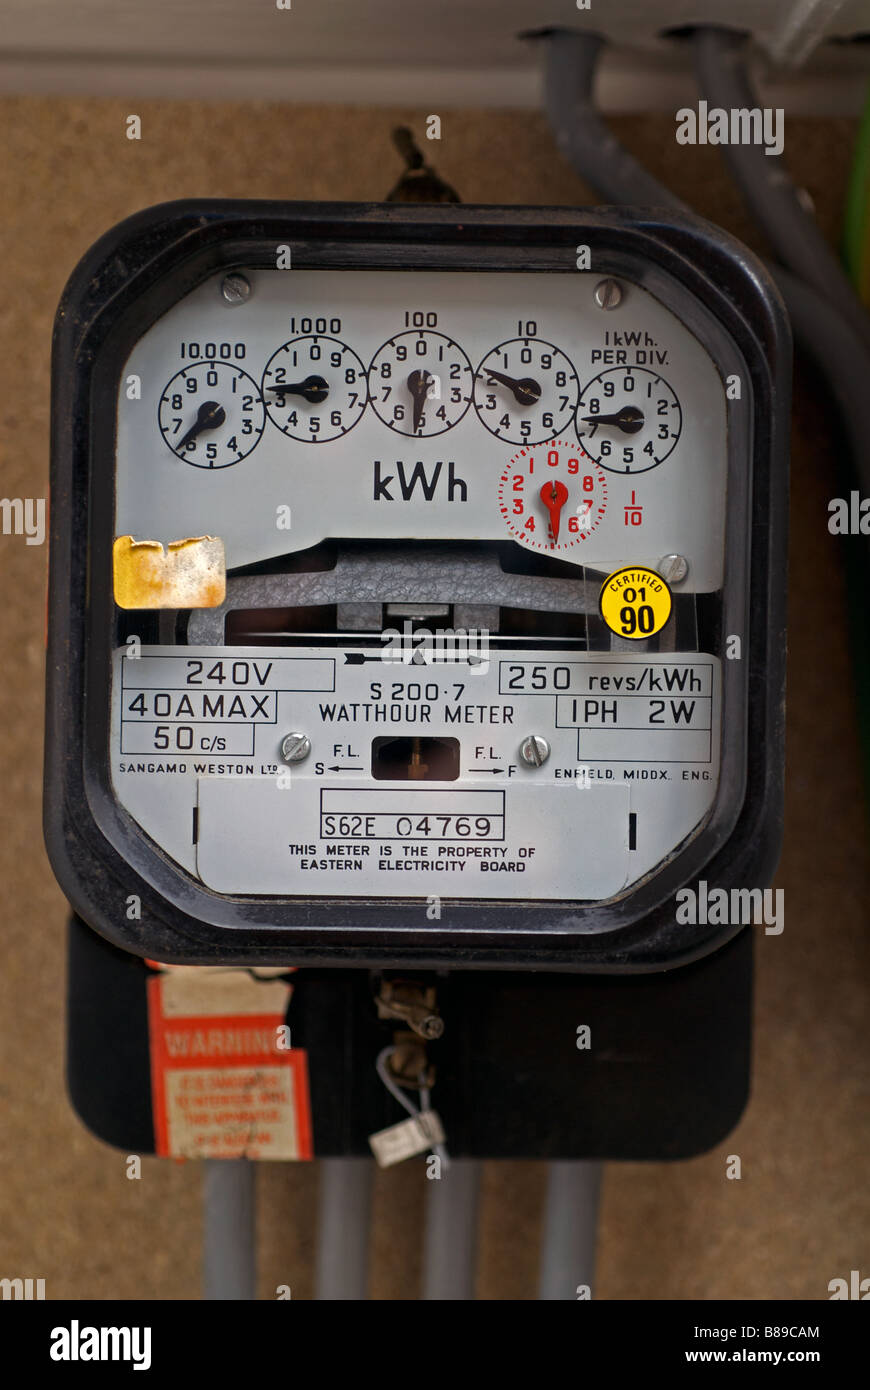 Domestic electricity meter, Bawdsey, Suffolk, UK. Stock Photo